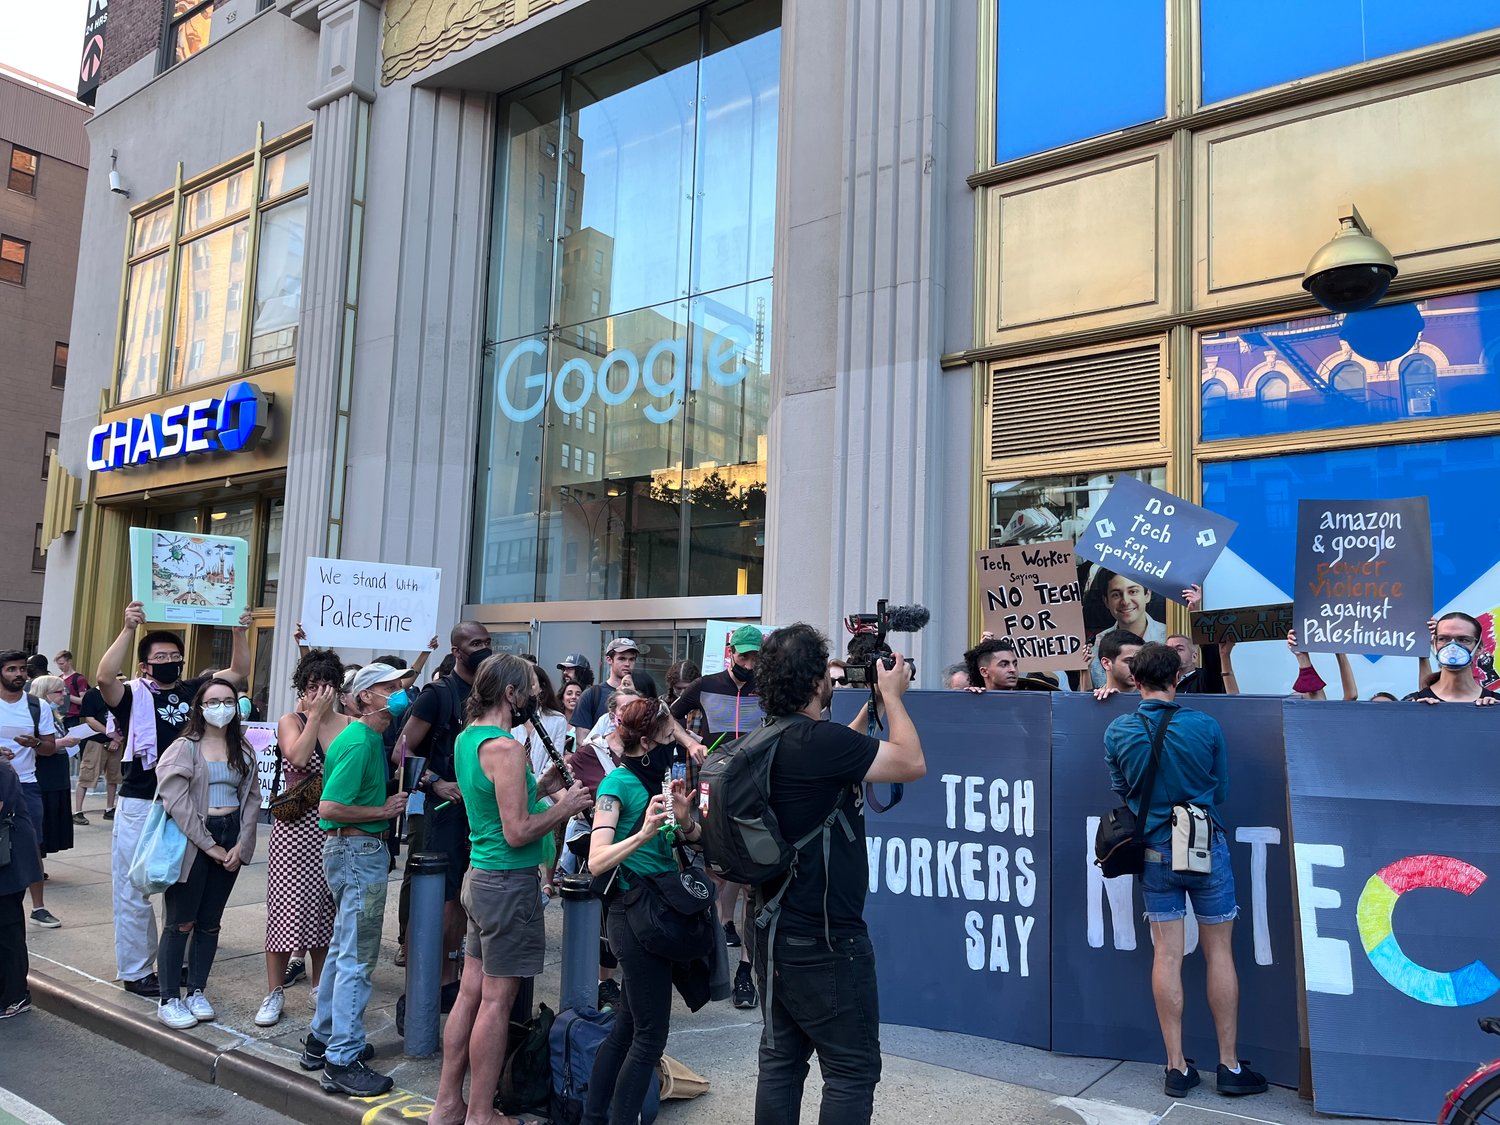 More than 200 tech workers and pro-Palestinian activists demonstrated outside Google’s Chelsea offices Sept. 8 to call on both Amazon and Google to cancel tech contracts with Israel.